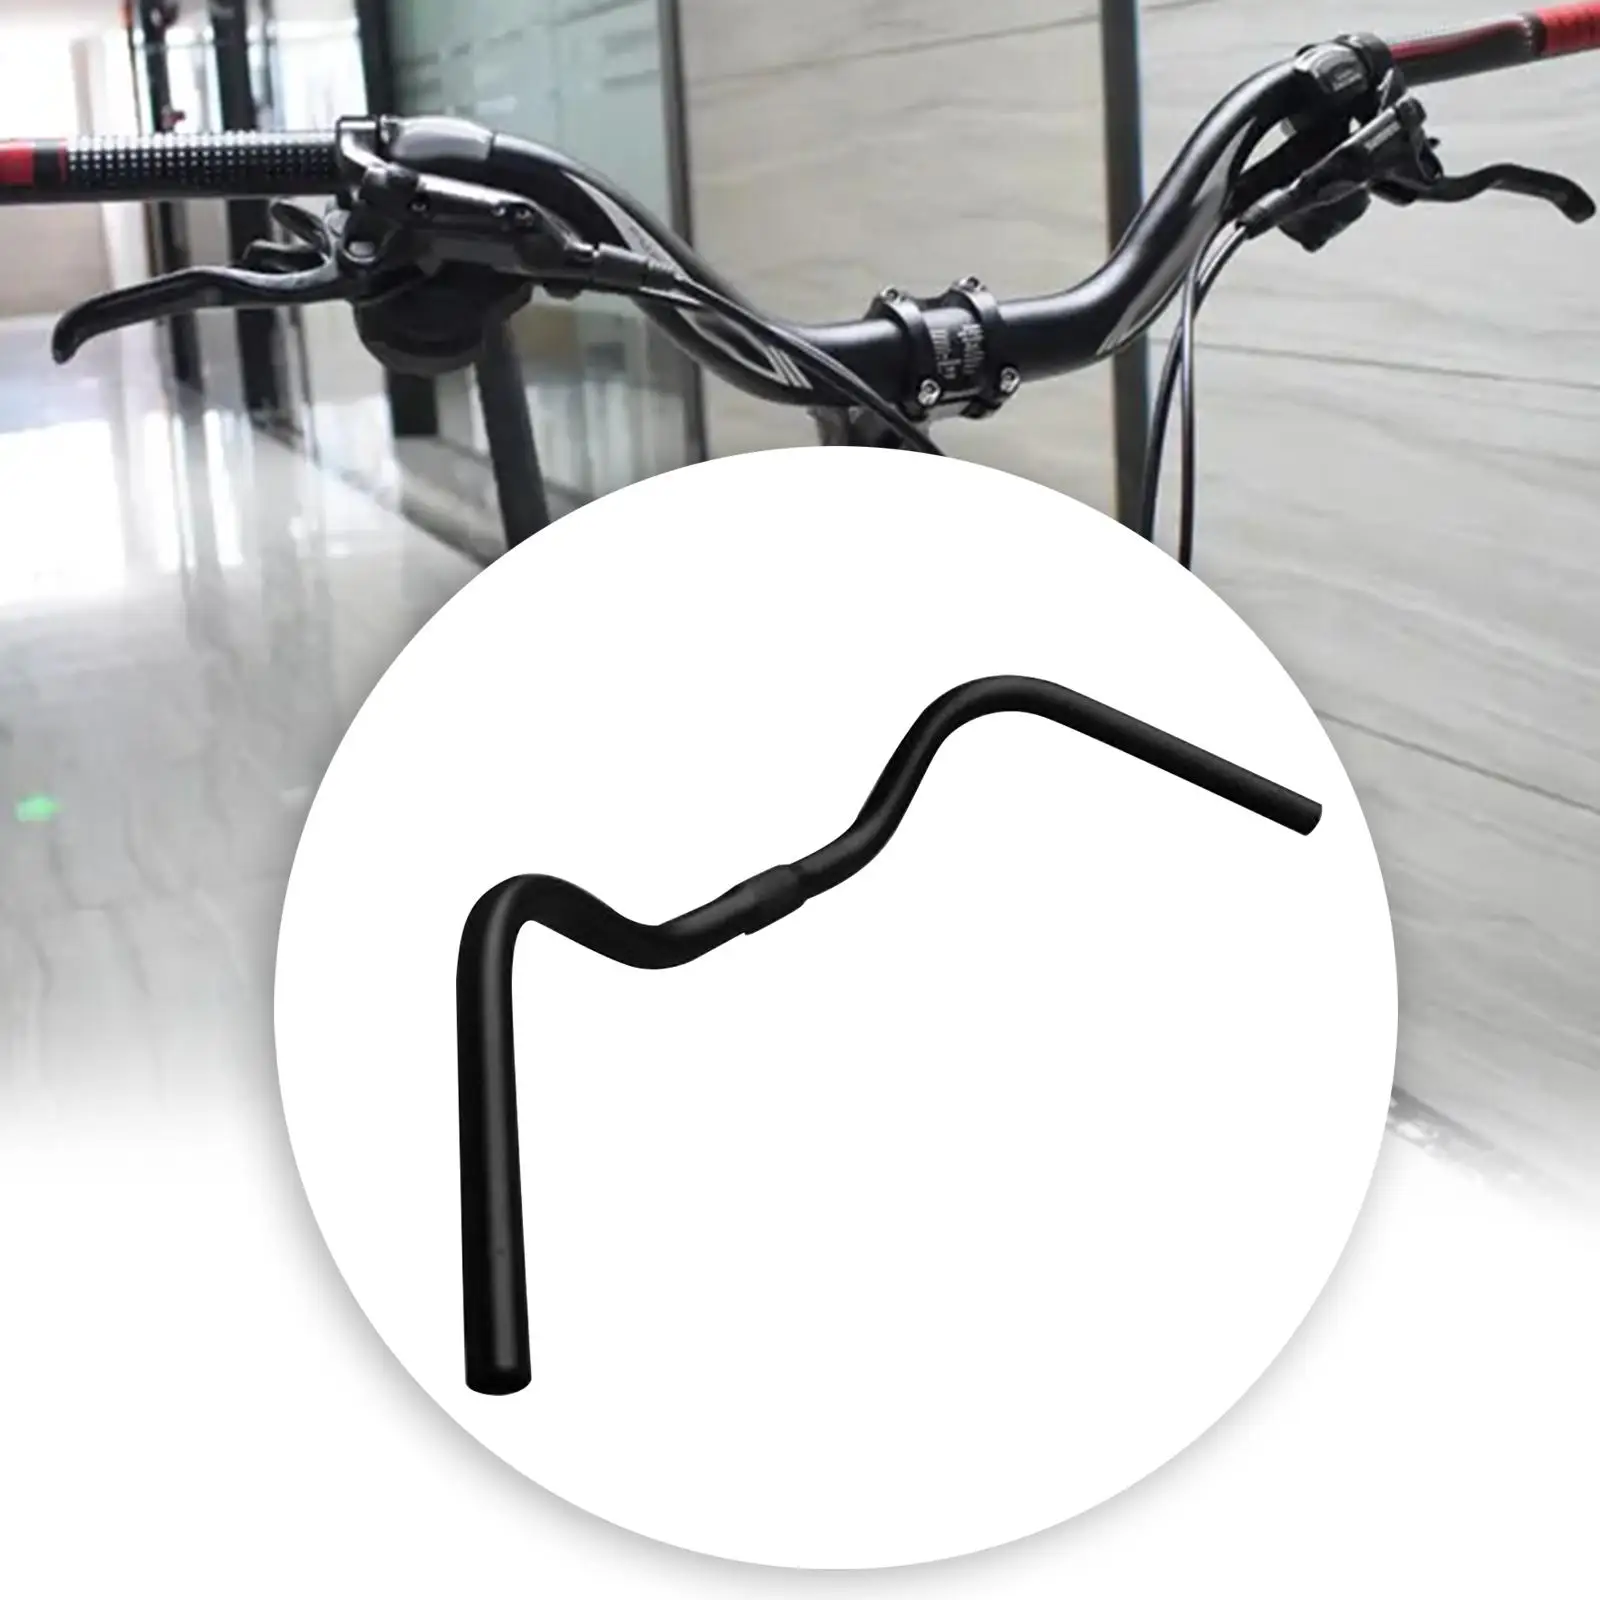 Bike Handlebar Fits 25.4mm Stems Ultralight 560mm Length Sturdy Bicycle Handlebars for Road Bikes Riding Replacement Accessories